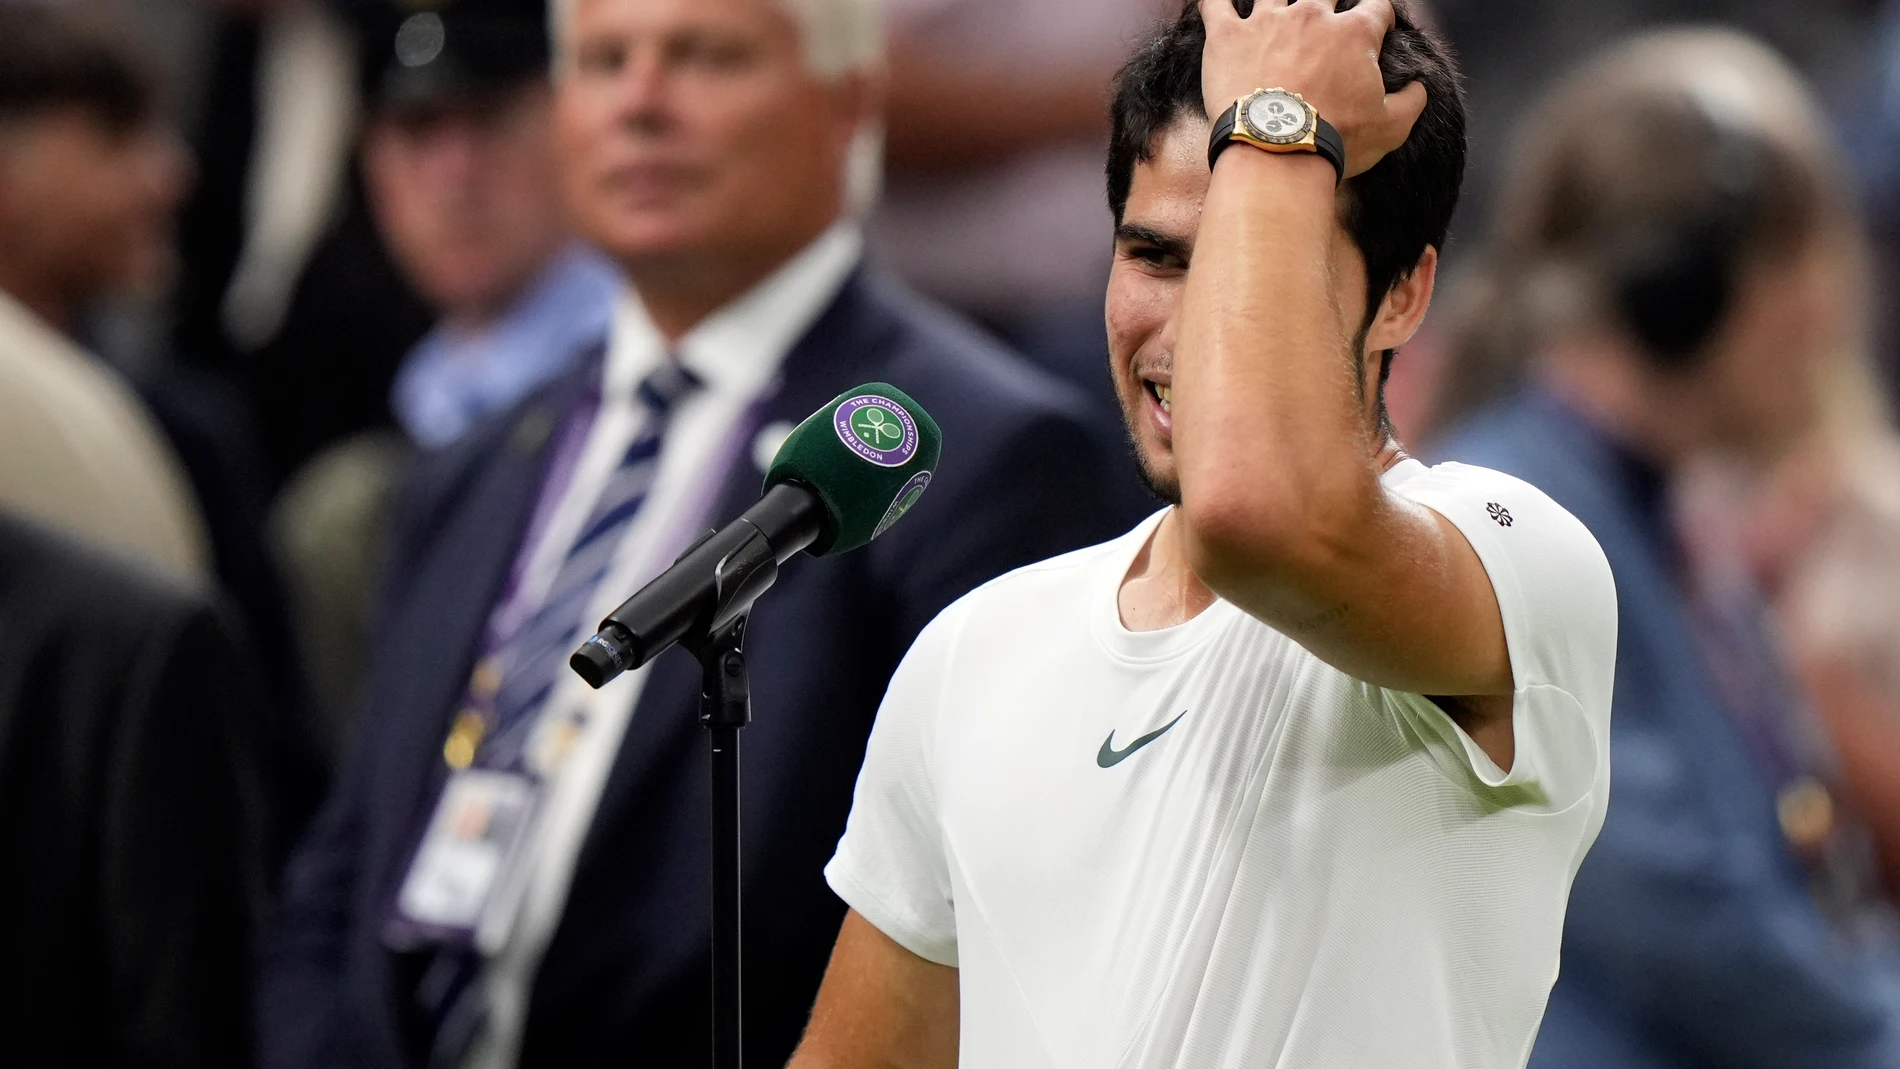 Spain's Carlos Alcaraz speaks after beating Russia's Daniil Medvedev in their men's singles semifinal match on day twelve of the Wimbledon tennis championships in London, Friday, July 14, 2023. (AP Photo/Alberto Pezzali)